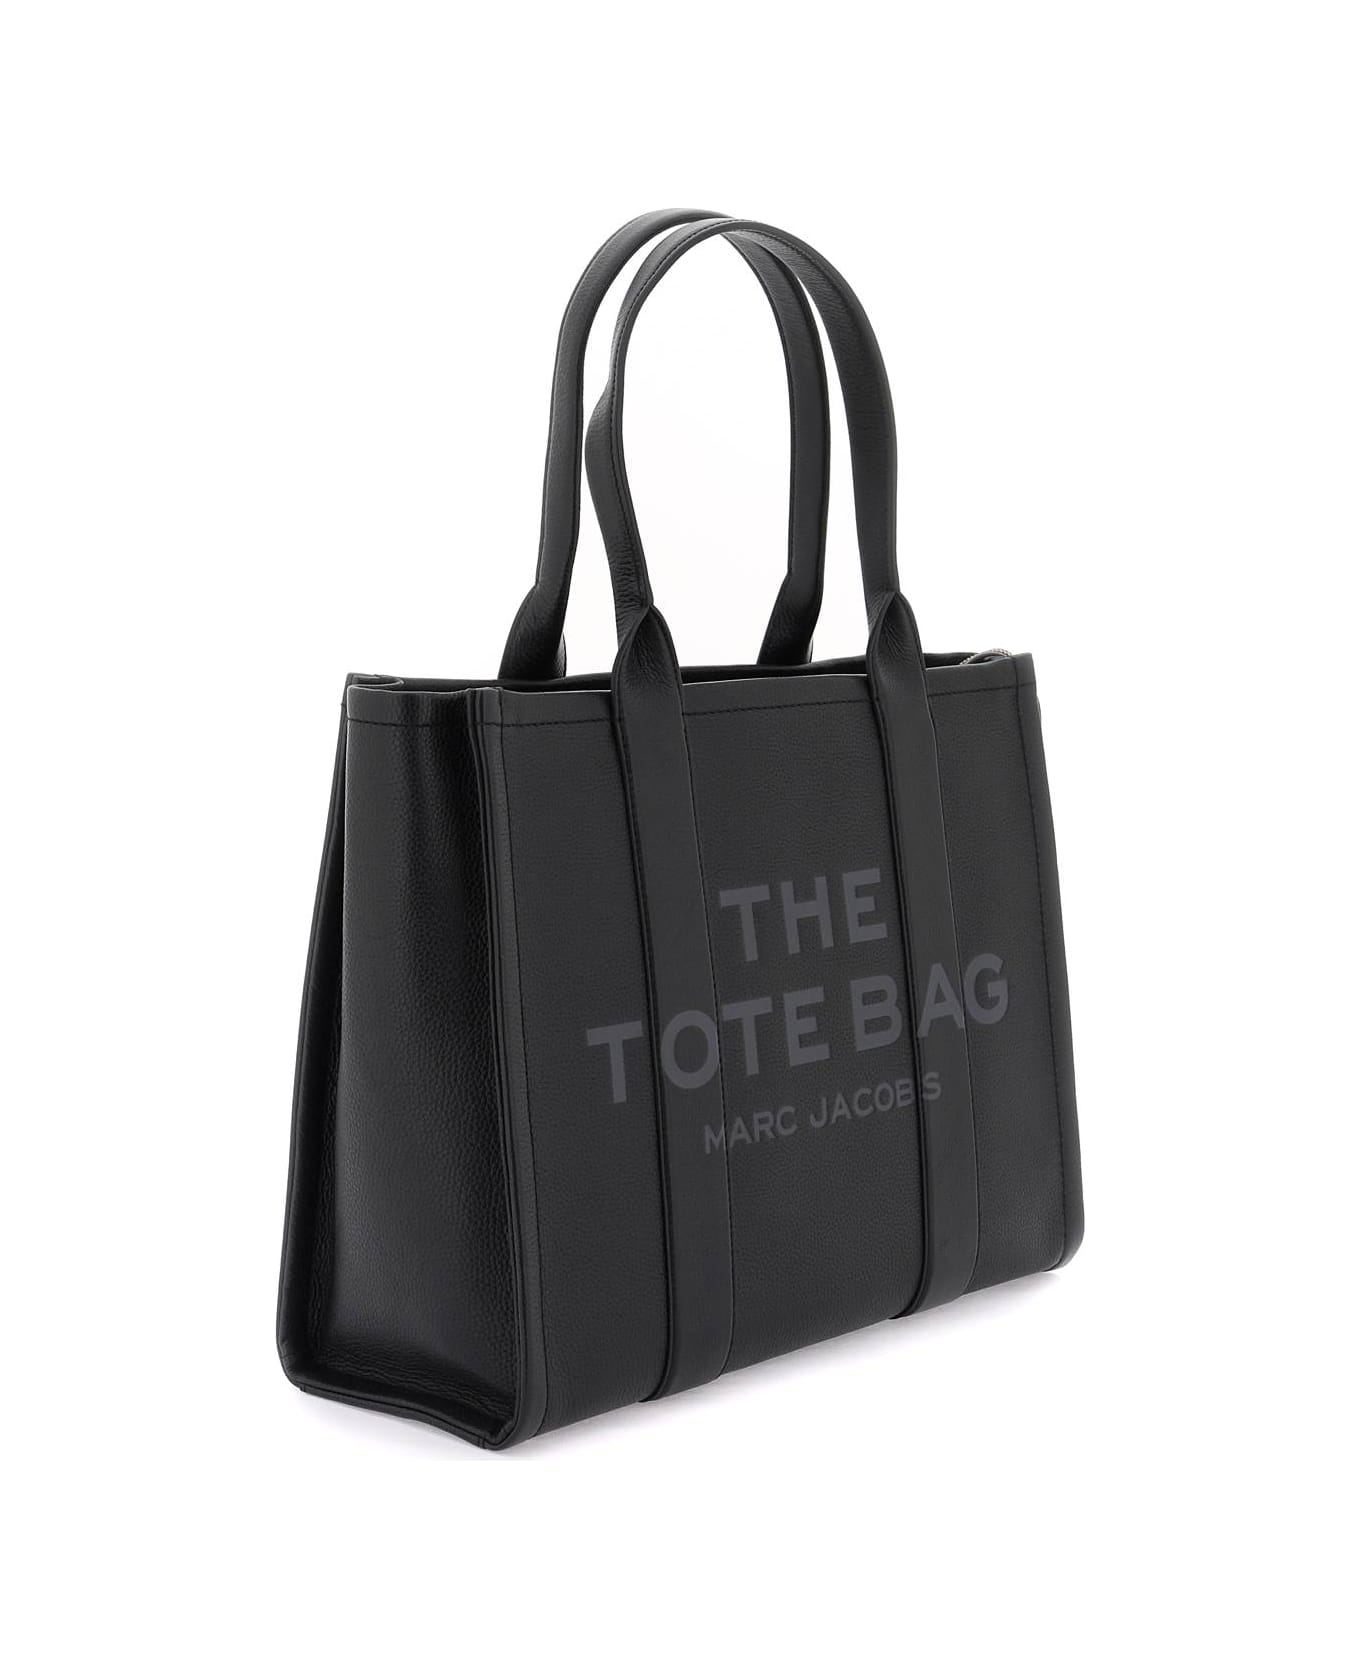 Marc Jacobs The Leather Large Tote Bag - BLACK (Black) トートバッグ